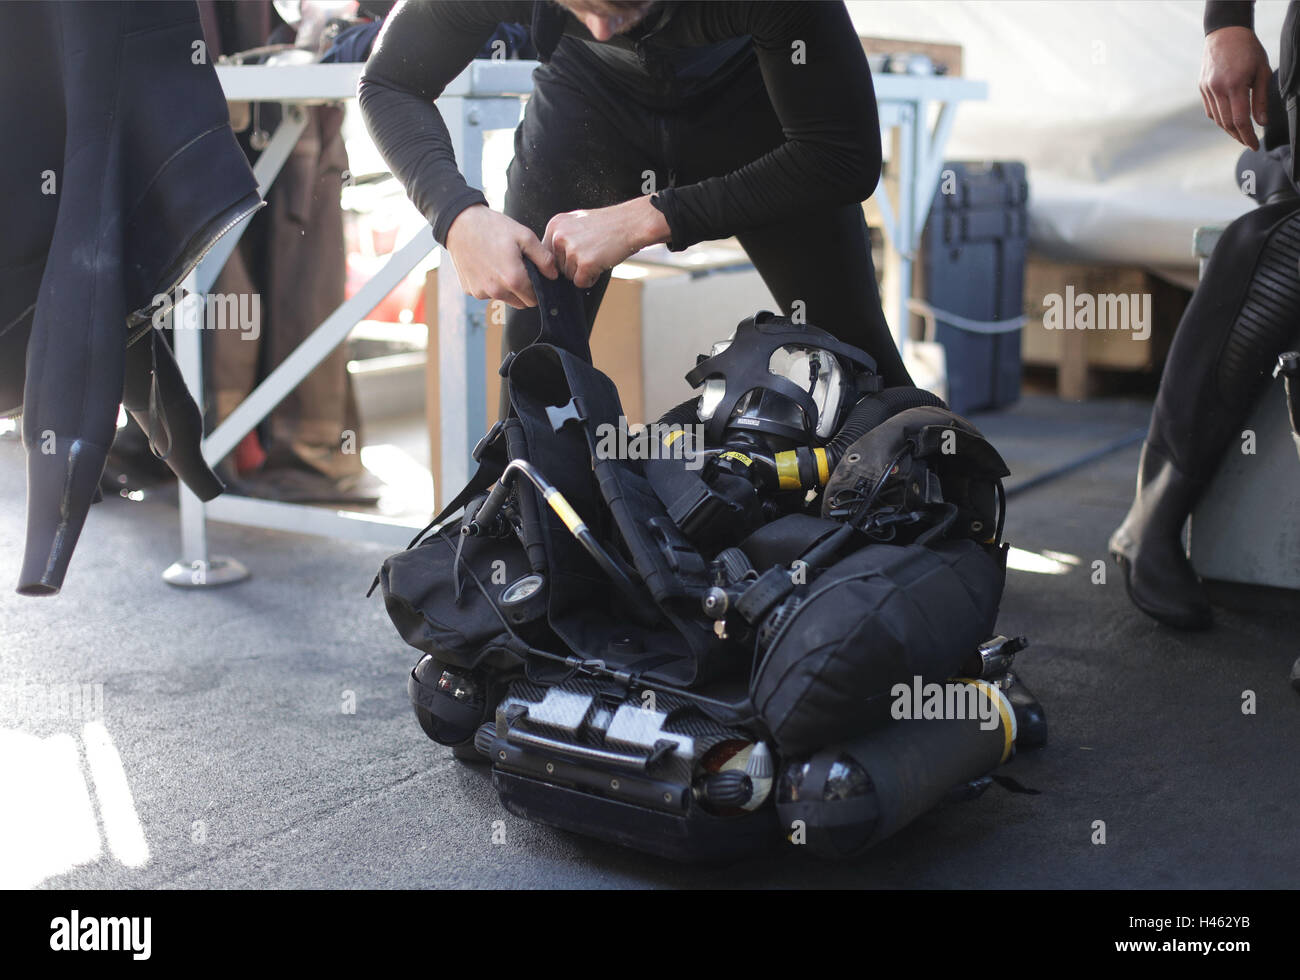 A diver checking his CDLSE (Clearance Divers Life Support Equipment) mixed gas diving kit on board HMS Cattistock - a Royal Navy Hunt-class mine countermeasures vessel - in the Lochs of western Scotland, during a Royal Navy Joint Warrior training exercise. Stock Photo